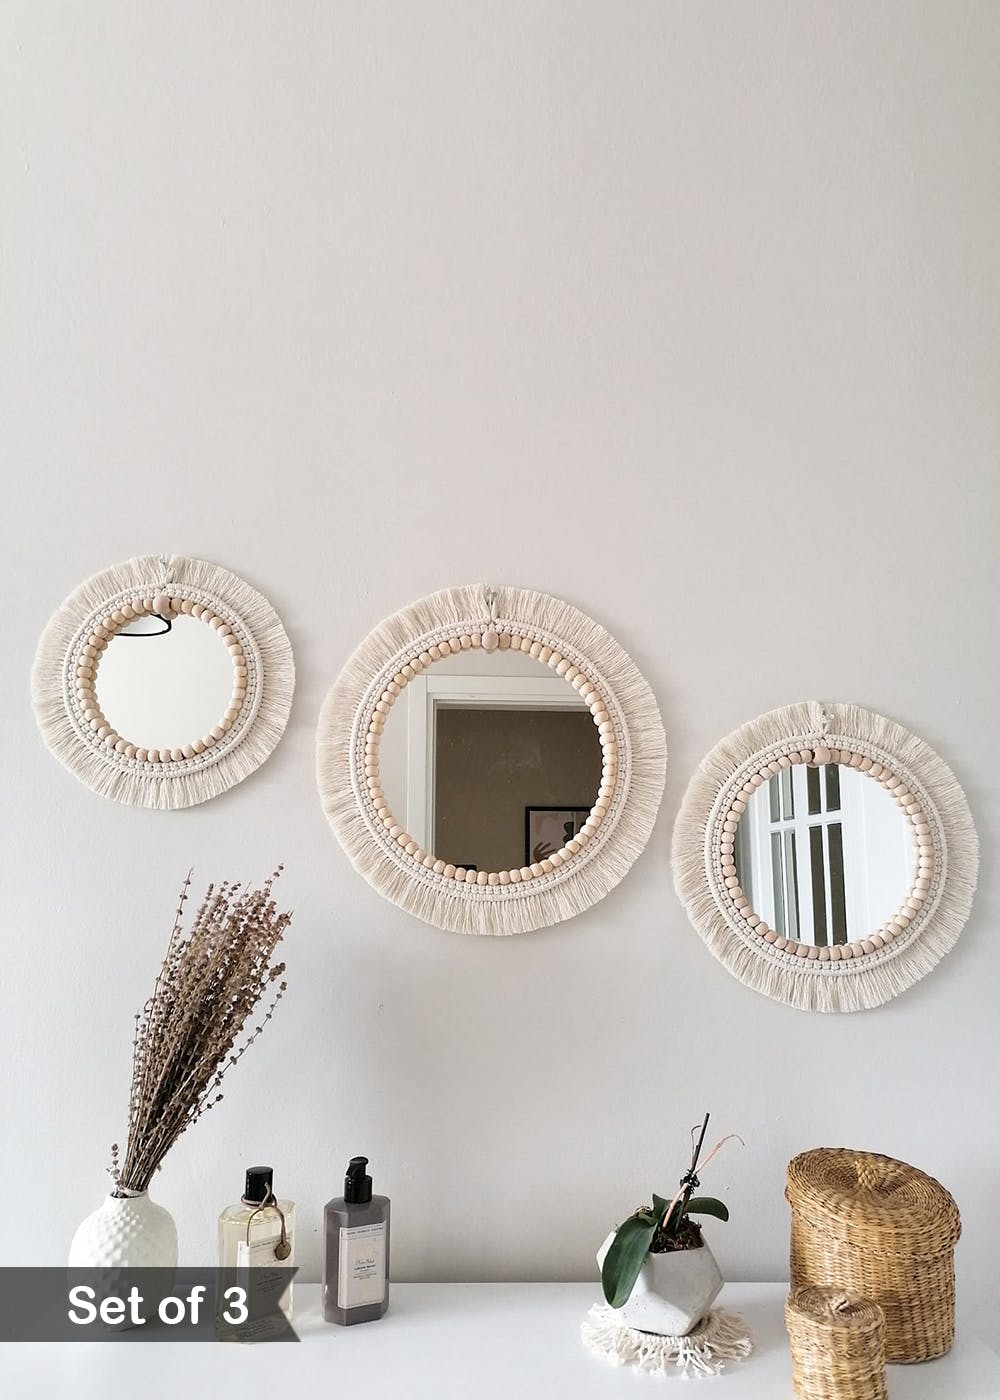 Handmade Knitted Decorative Wall Mirror - Off White - Set of 3